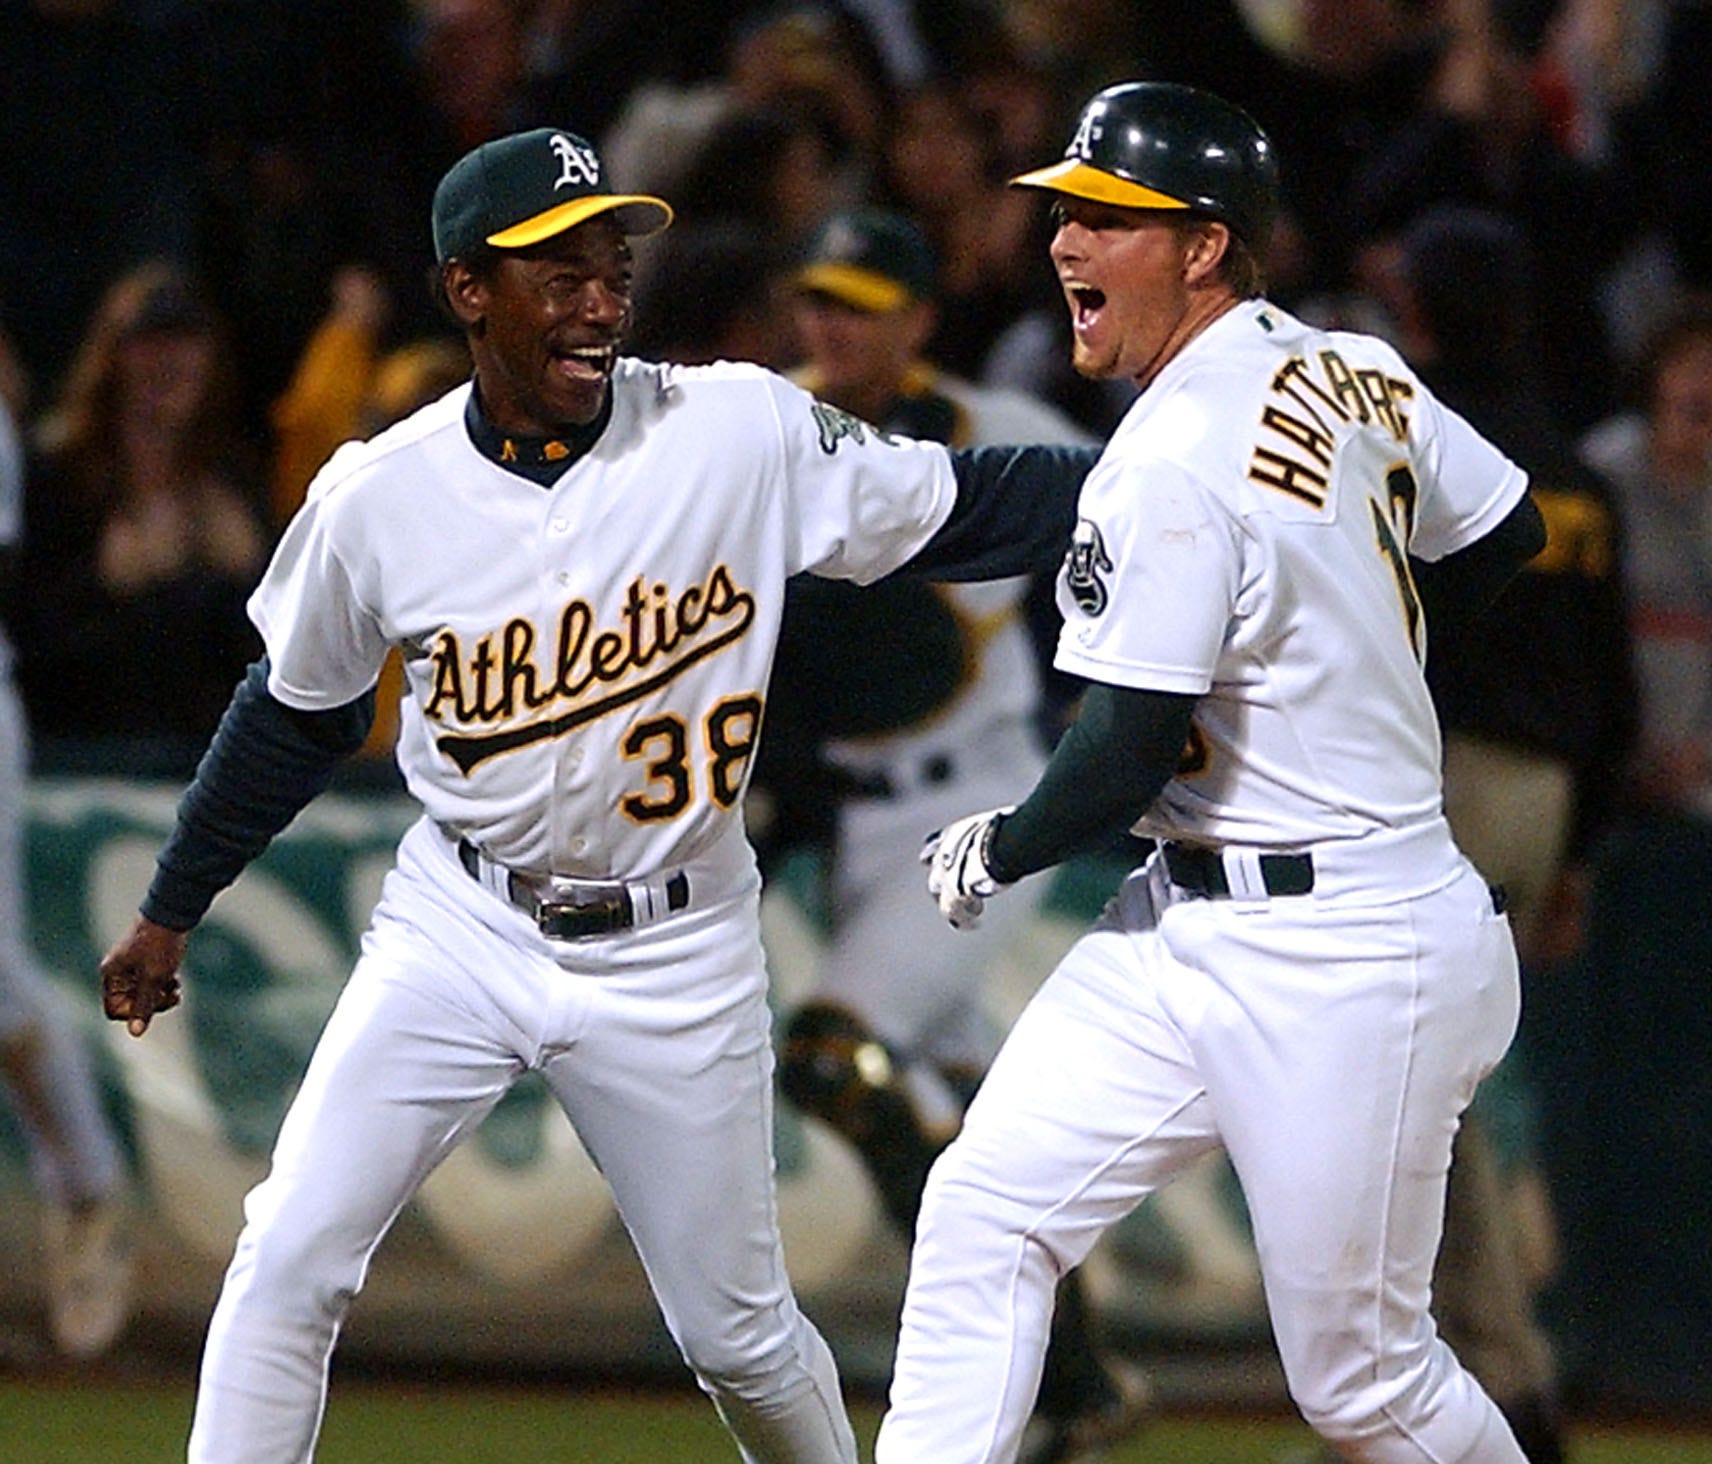 Scott Hatteberg, right, celebrates with third base coach Ron Washington after hitting the game-winning home run to ensure Oakland's 20th consecutive victory in 2002.